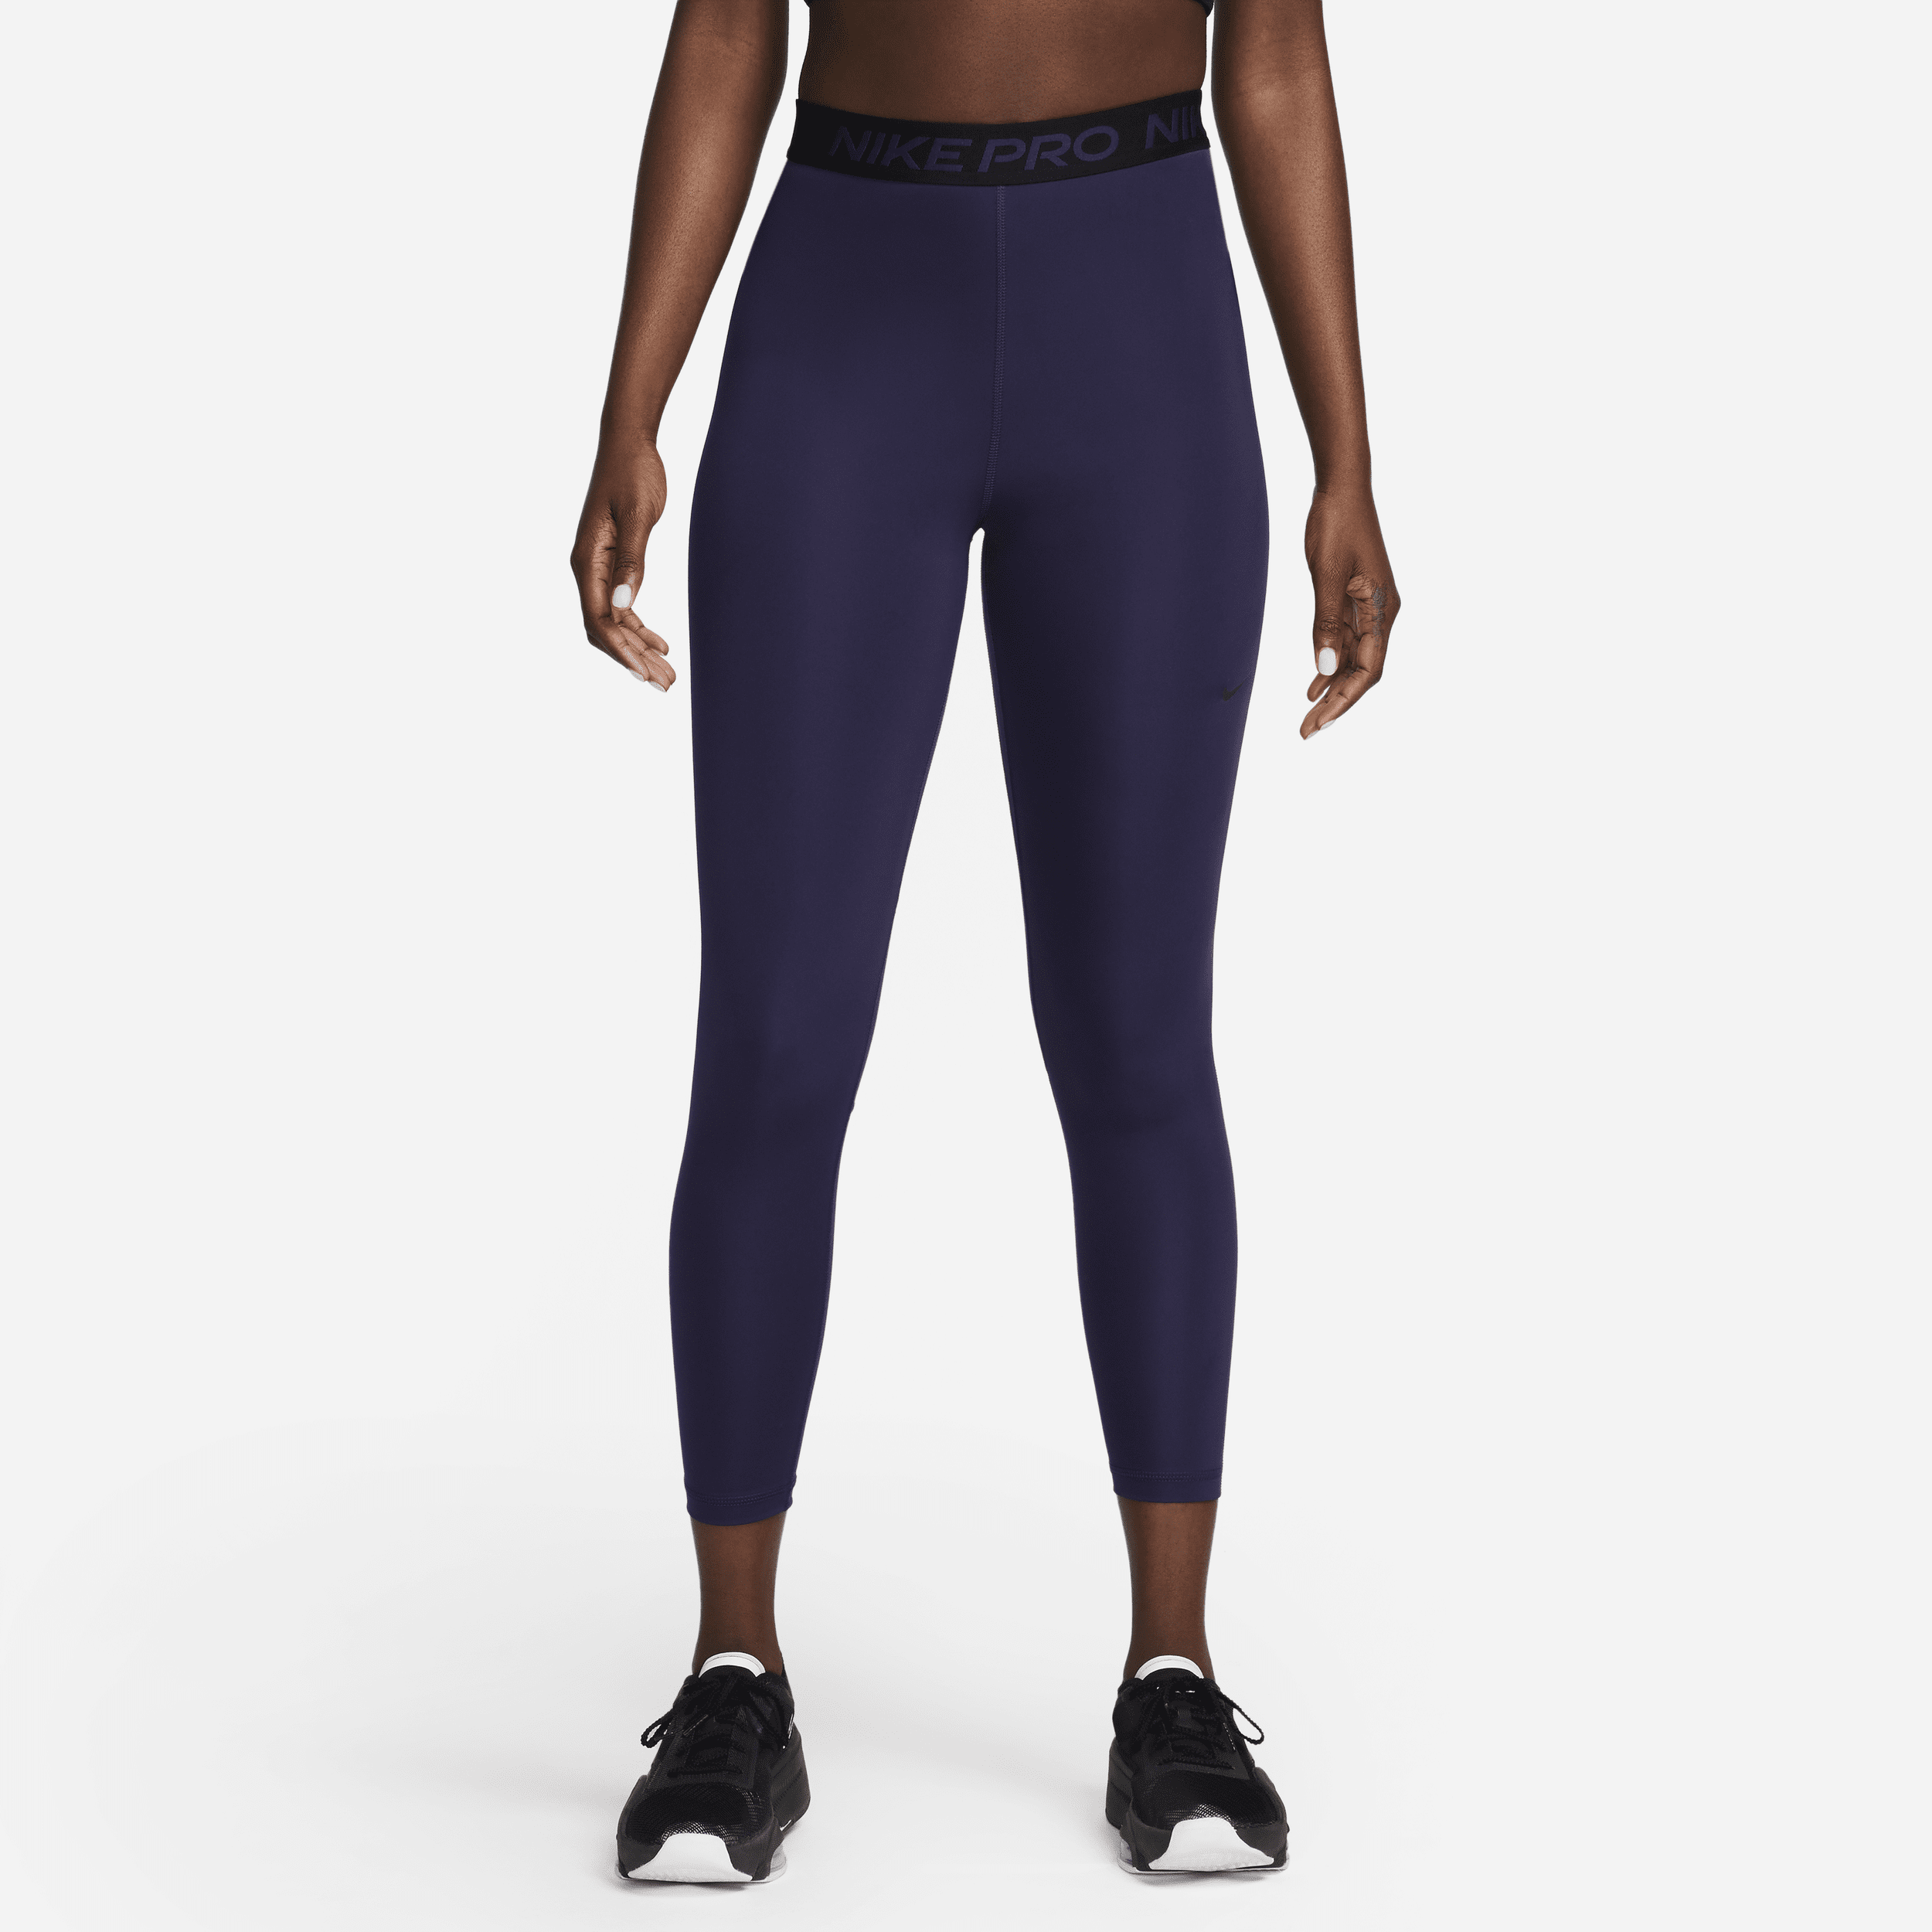 Nike Plus Pro 365 Leggings With Pink Waist Band In Black